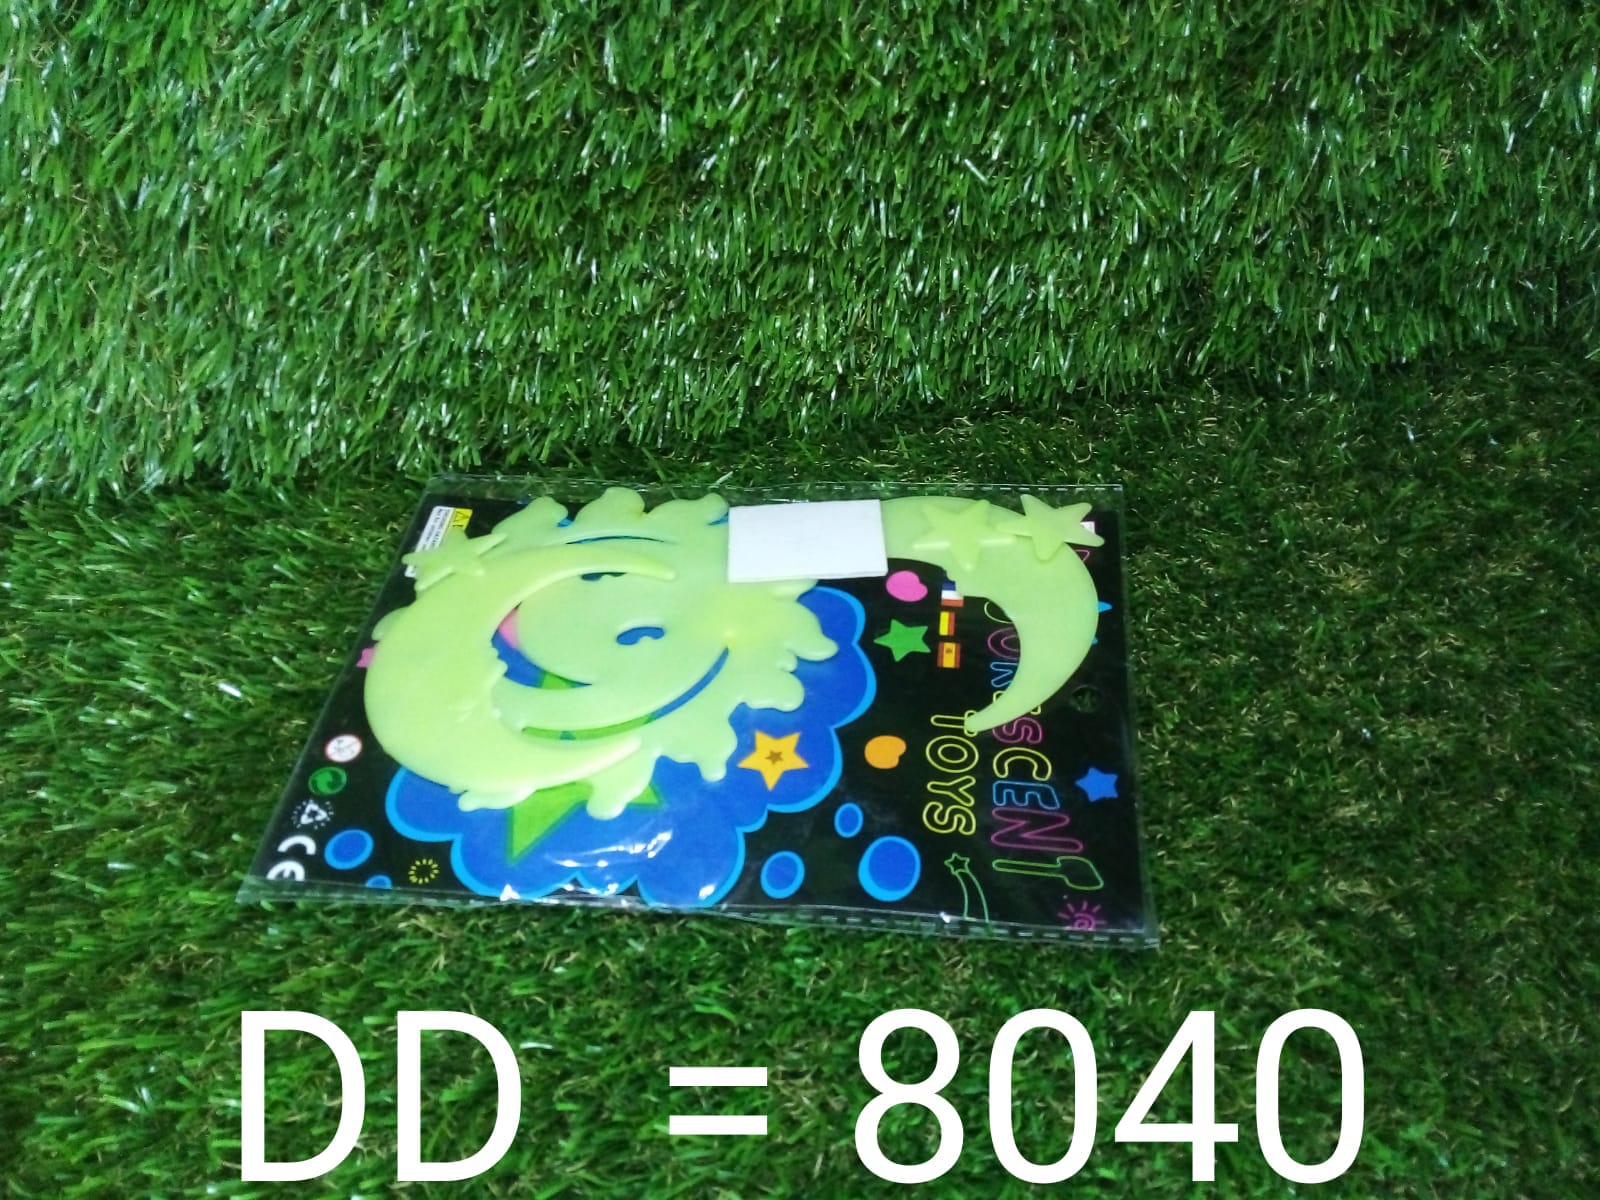 8040 Fluorescent Luminous Board with Light Fun and Developing Toy 